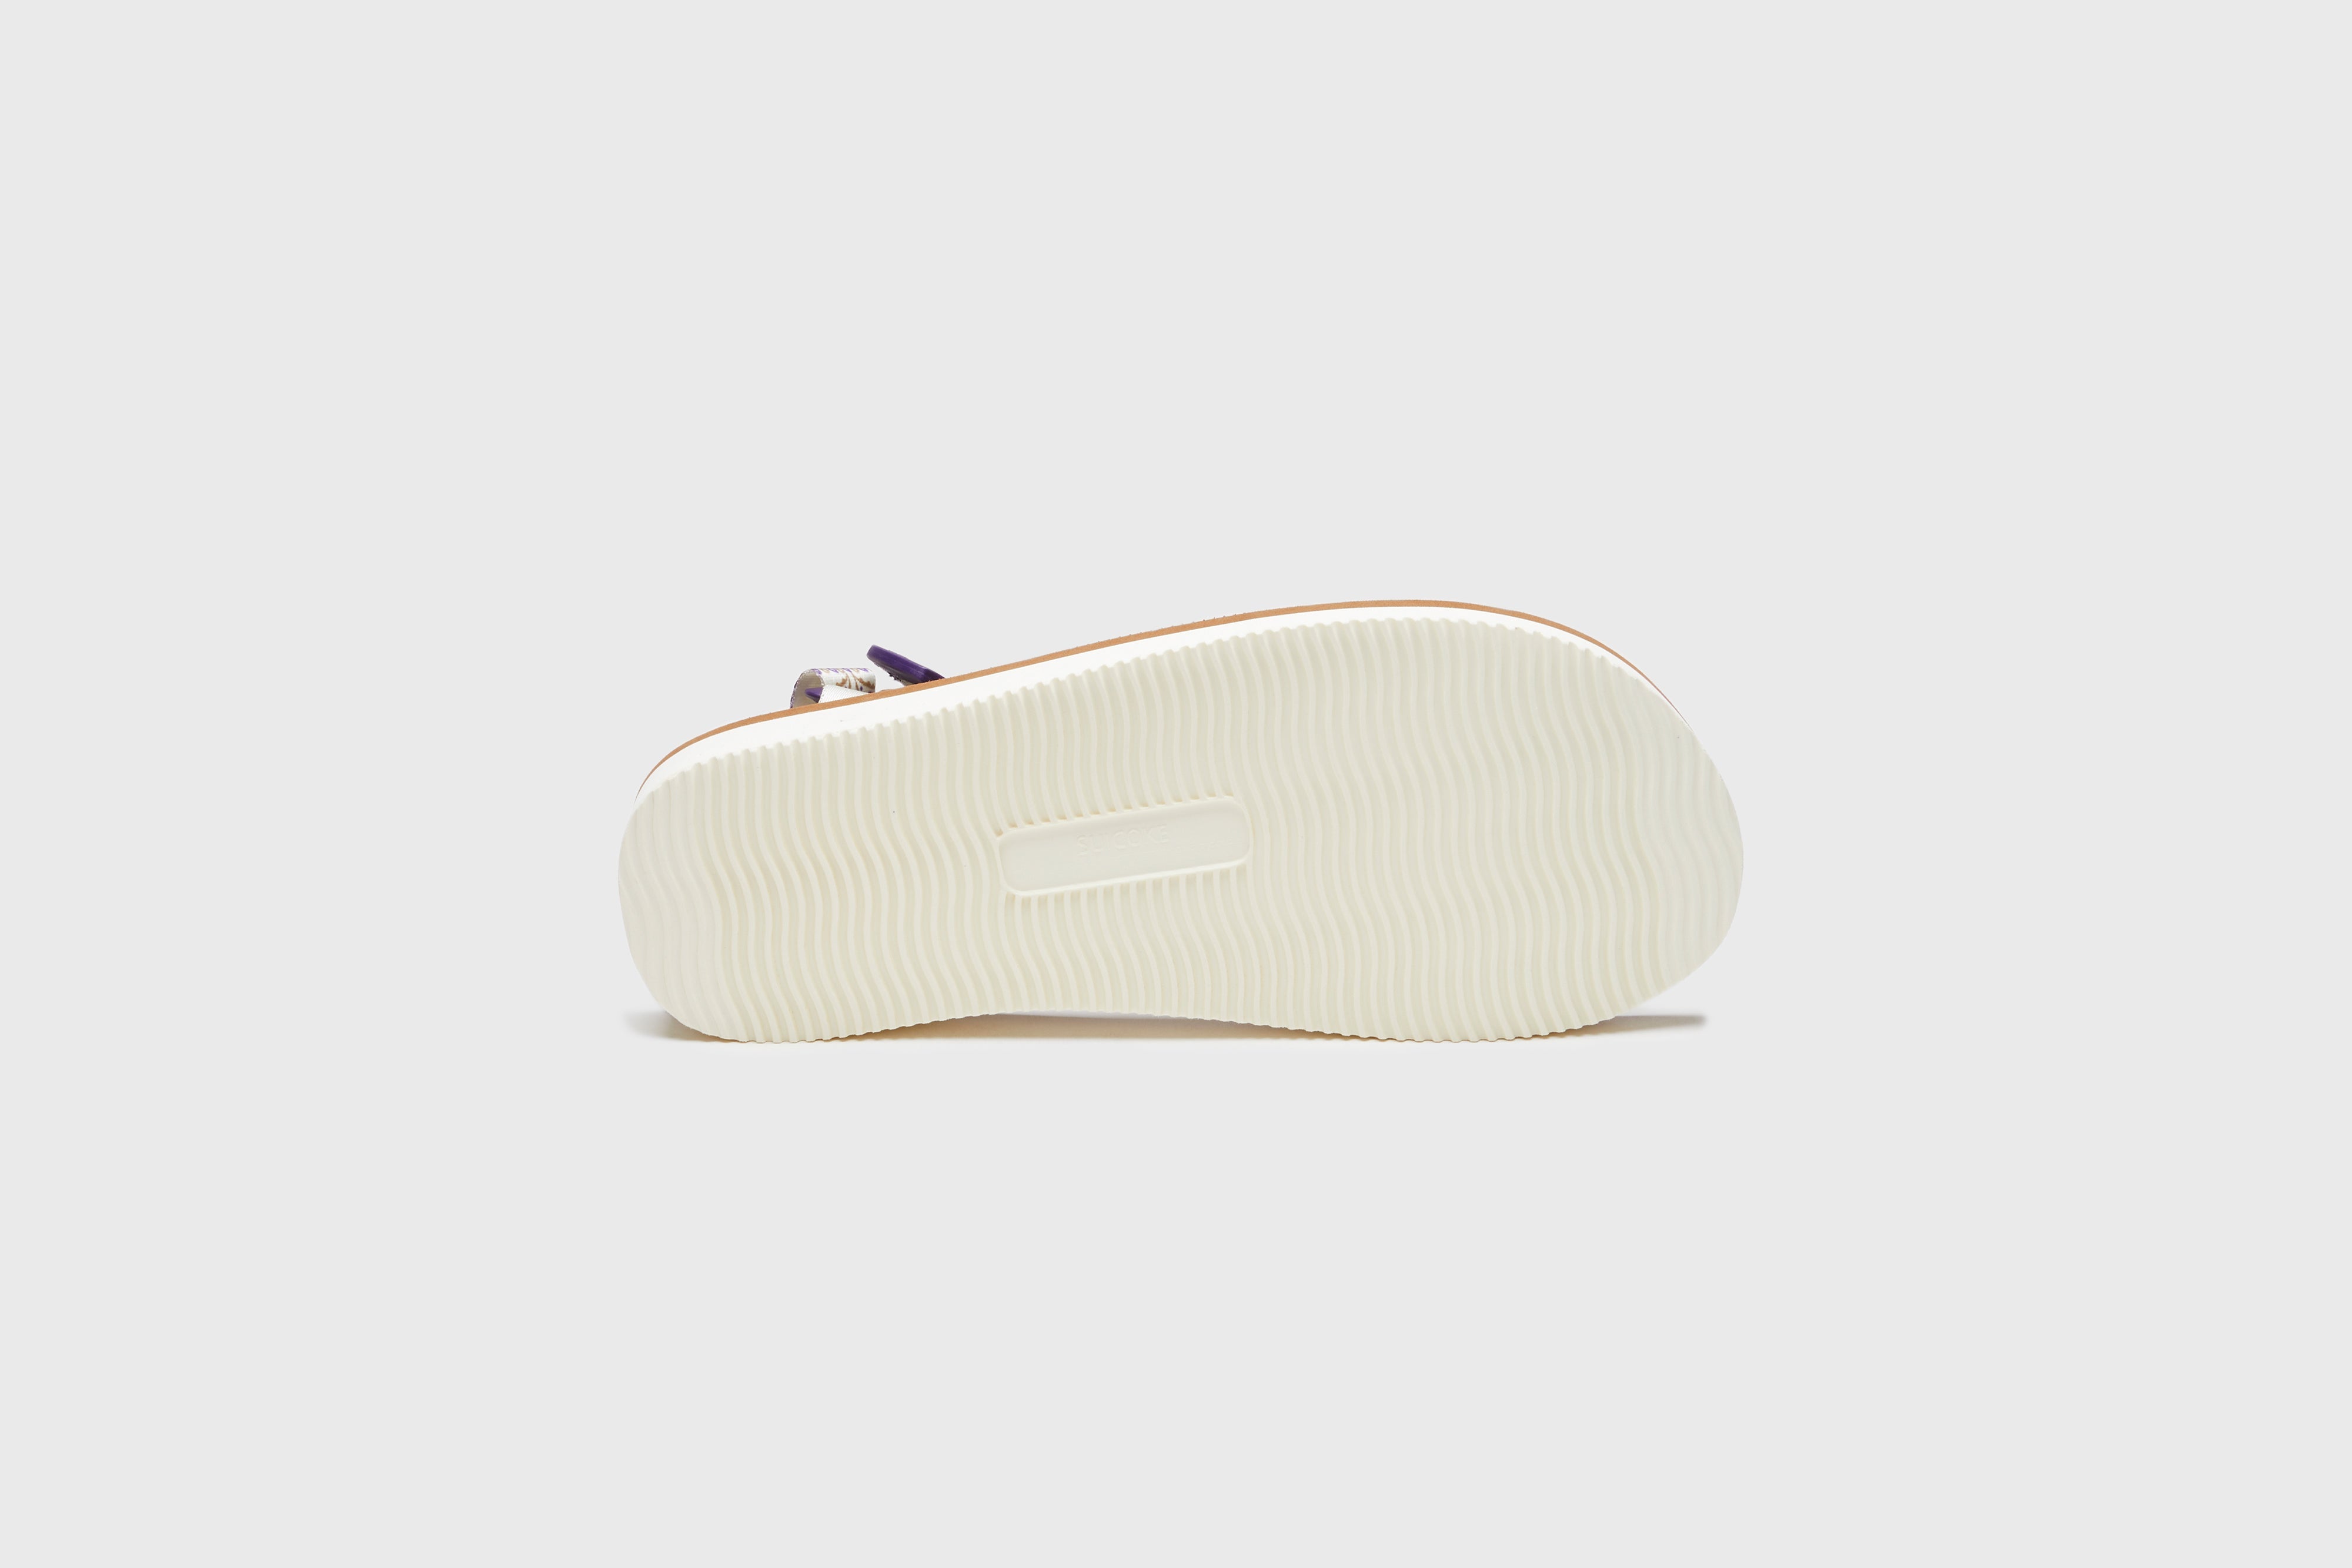 SUICOKE DEPA-2PO sandals with ivory & brown nylon upper, ivory & brown midsole and sole, strap and logo patch. From Spring/Summer 2023 collection on eightywingold Web Store, an official partner of SUICOKE. OG-022-2PO IVORY X BROWN